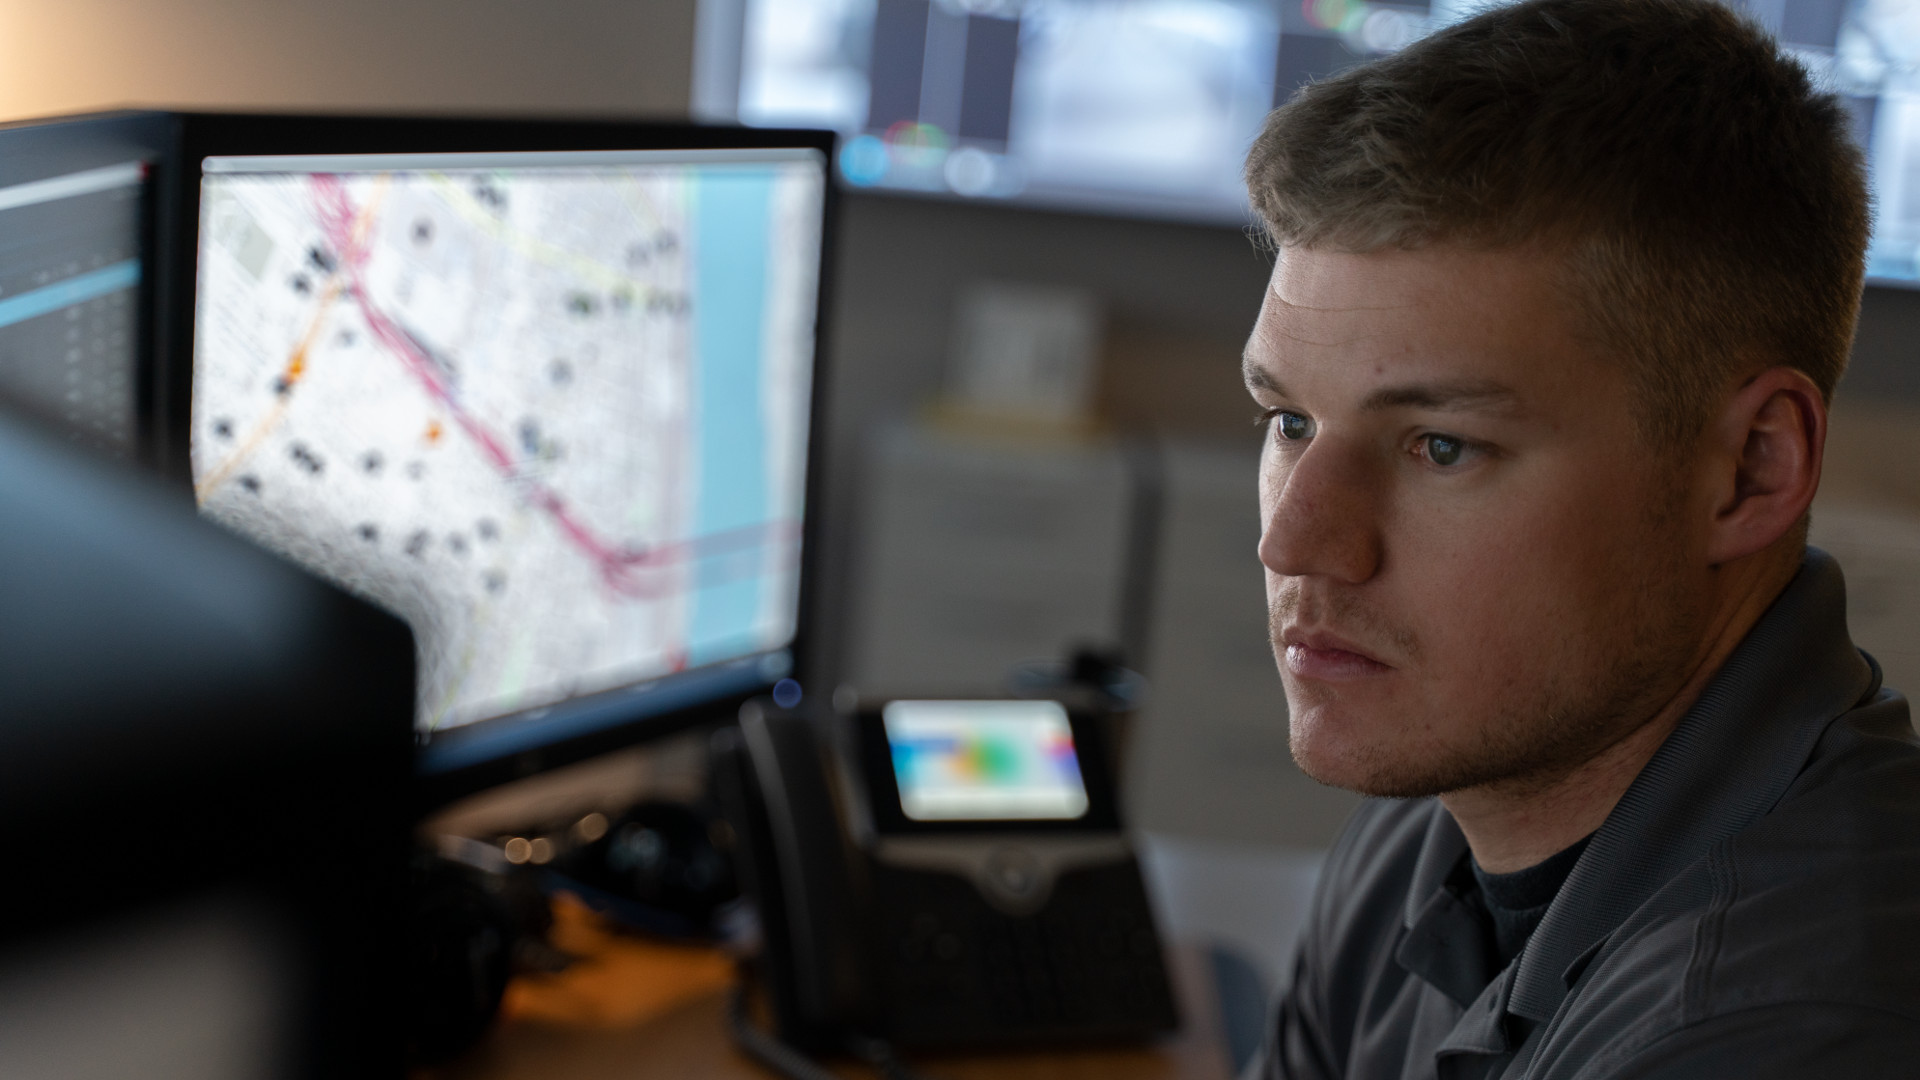 Man Looking at CommandCentral Investigate Crime Analysis Software